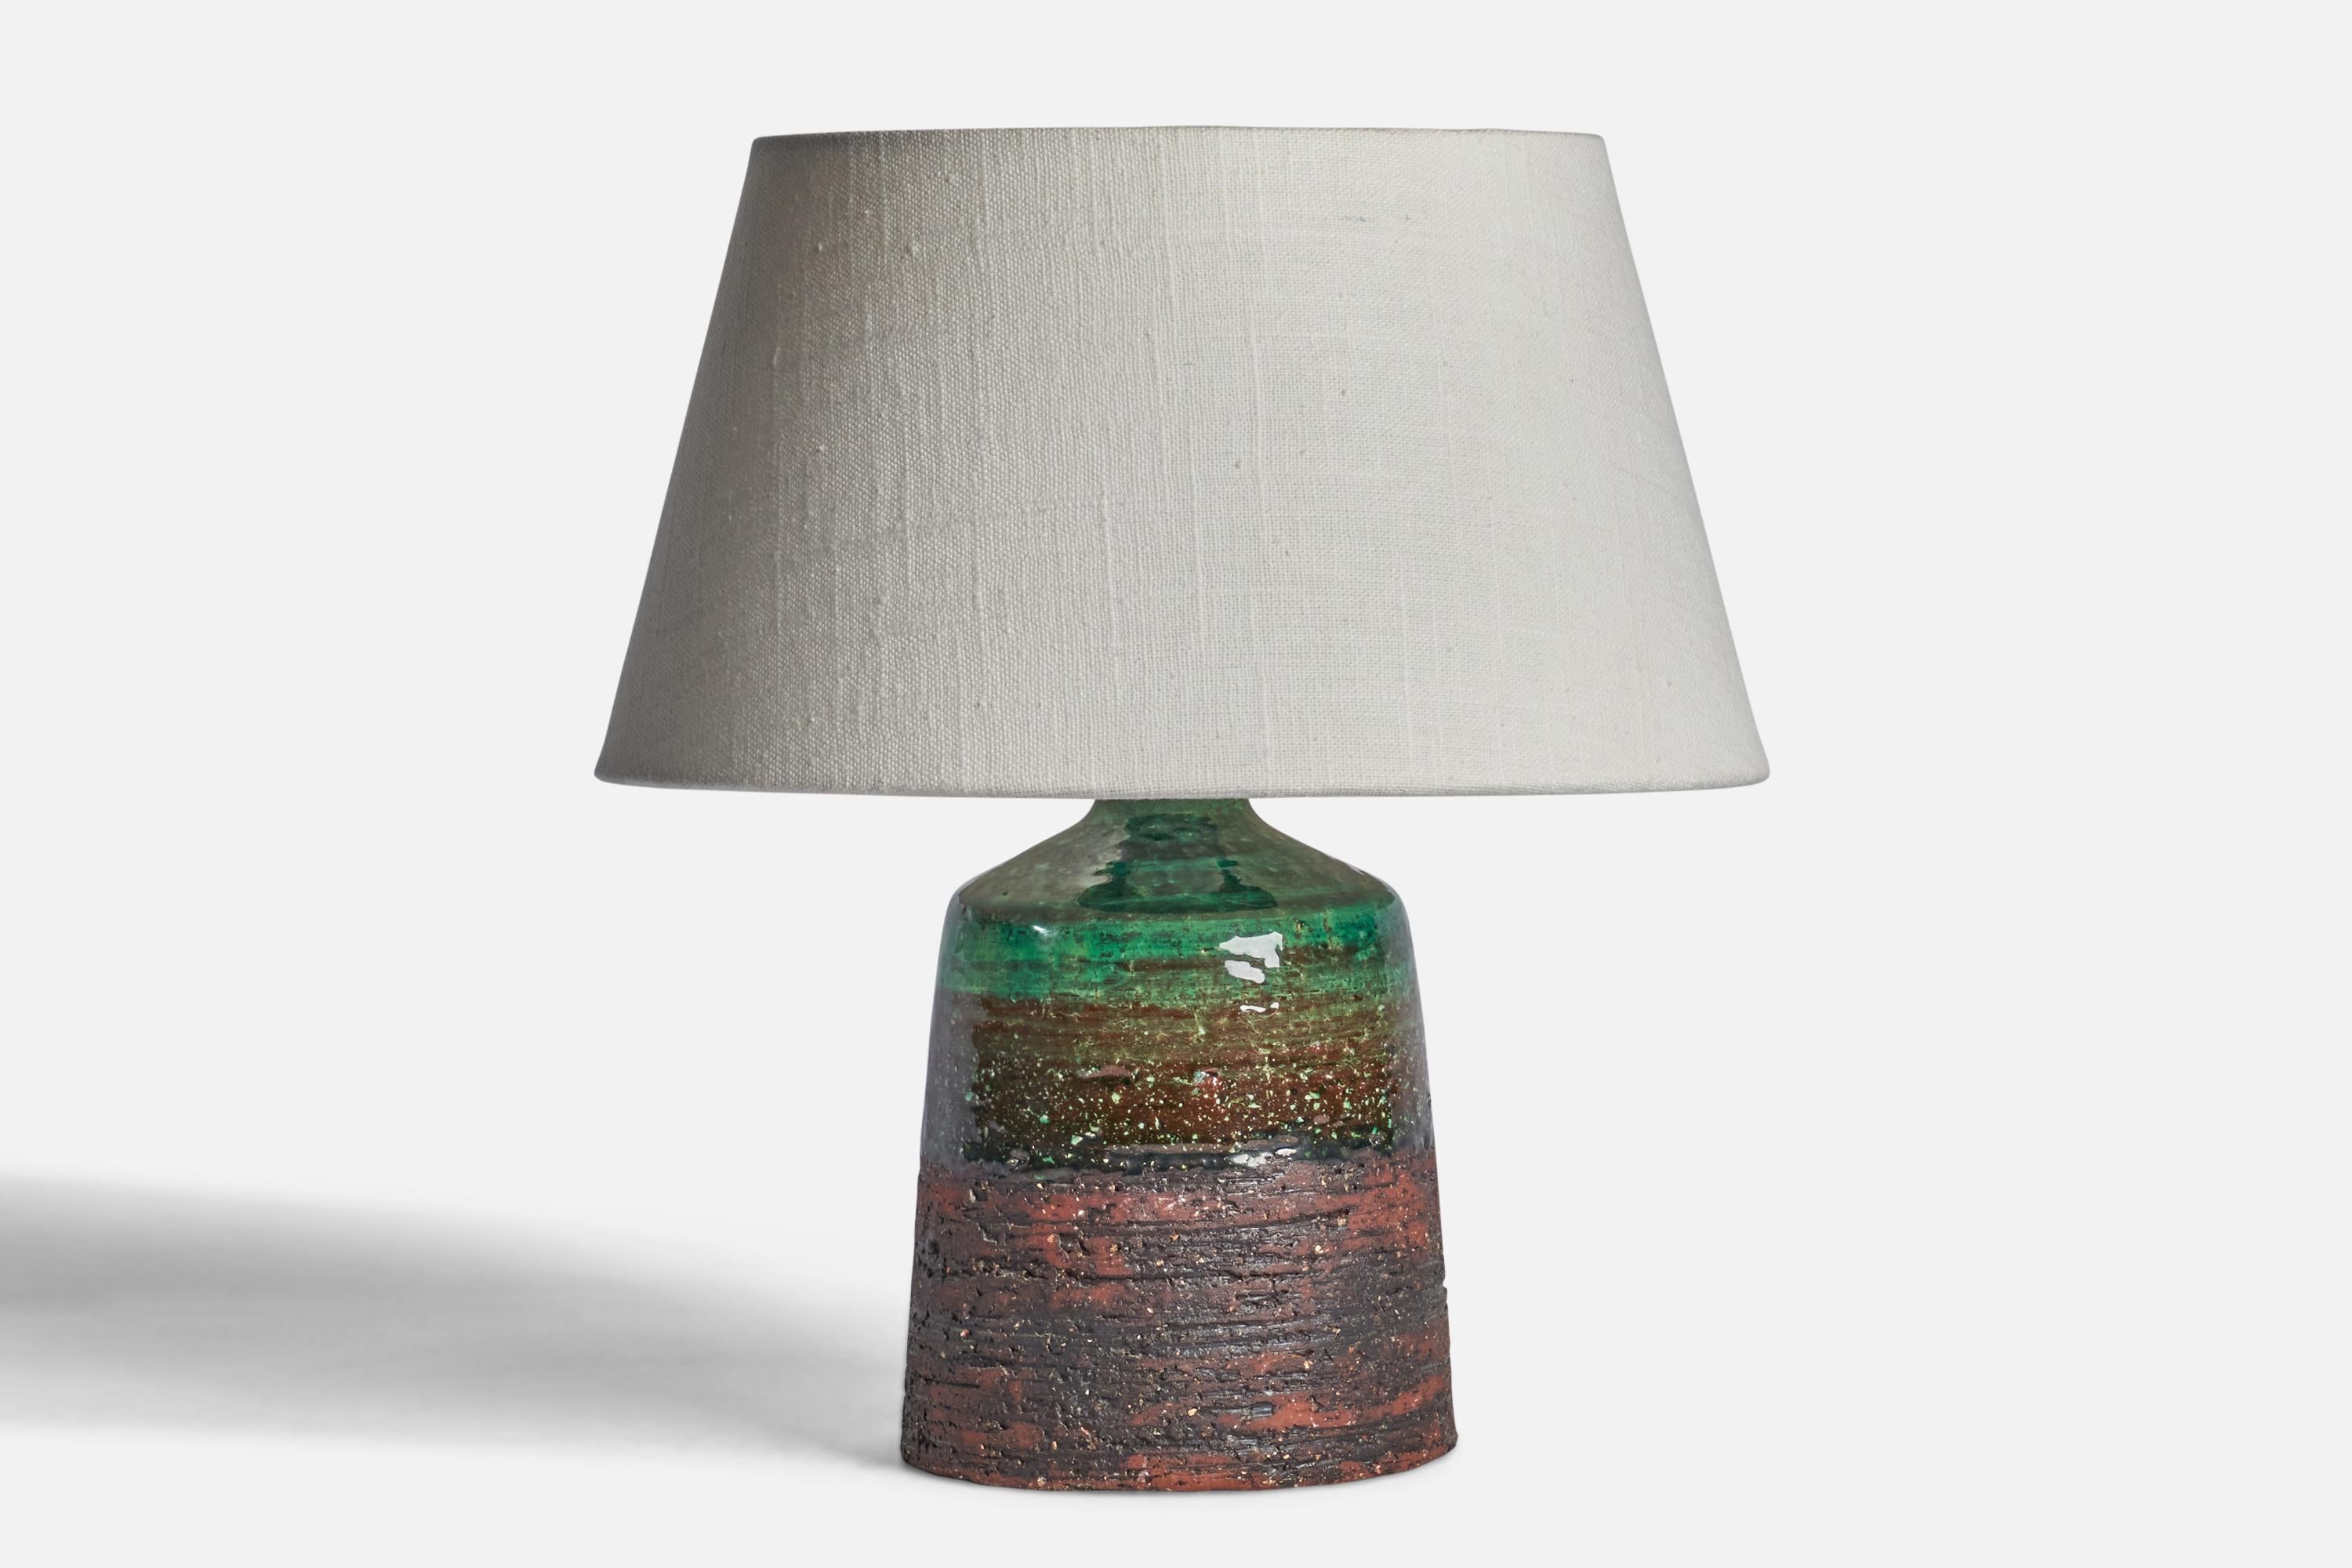 A green and red-glazed stoneware table lamp designed and produced by Tilgmans Keramik, Sweden, 1960s.

Dimensions of Lamp (inches): 9.65” H x 4.80” Diameter
Dimensions of Shade (inches): 7” Top Diameter x 10” Bottom Diameter x 5.5” H 
Dimensions of